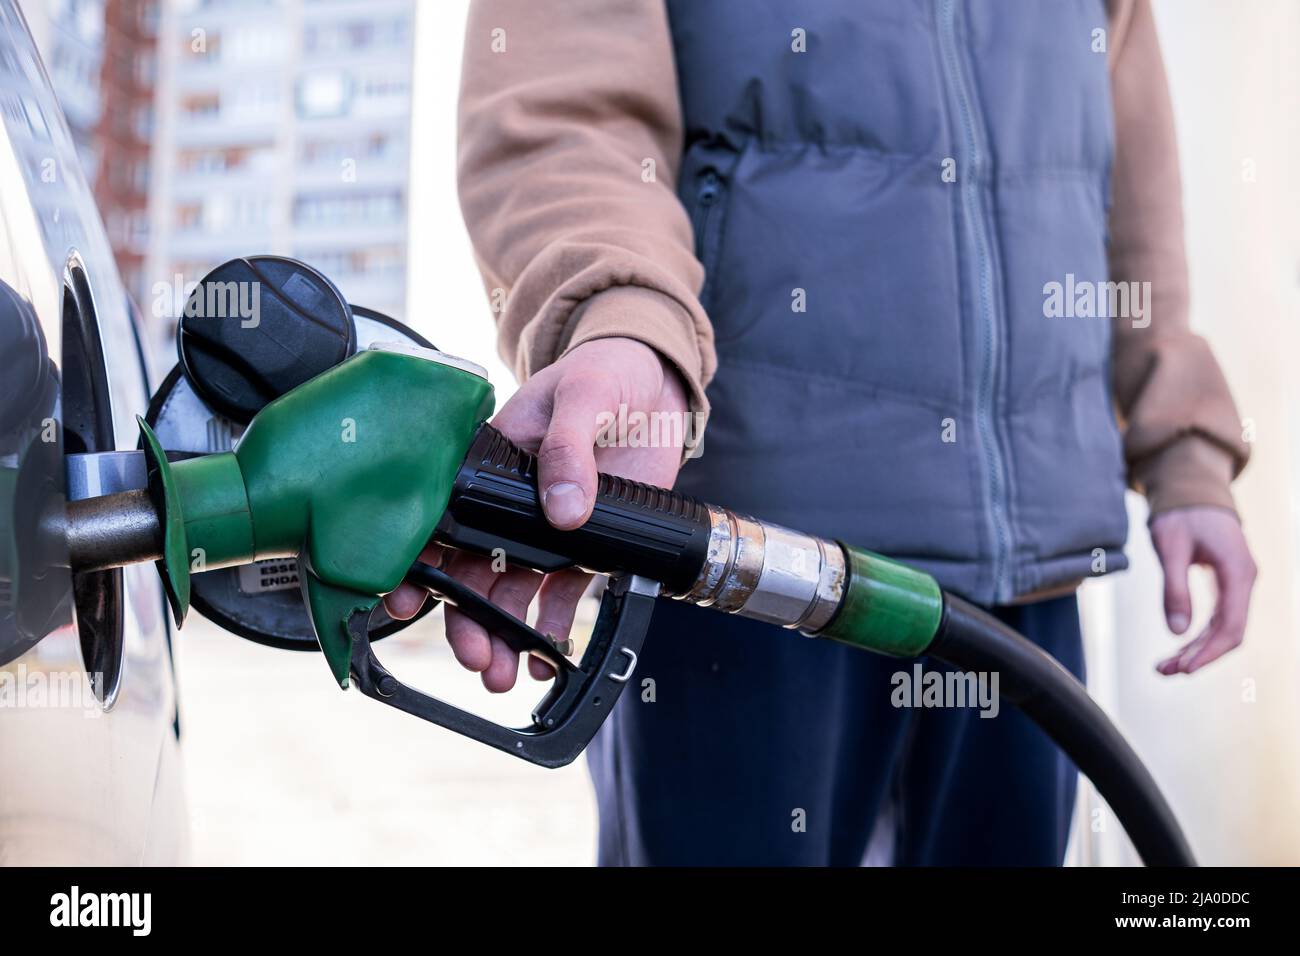 Pumping gasoline fuel into a car at a gas station. The man inserted a fuel pistol into the tank Stock Photo